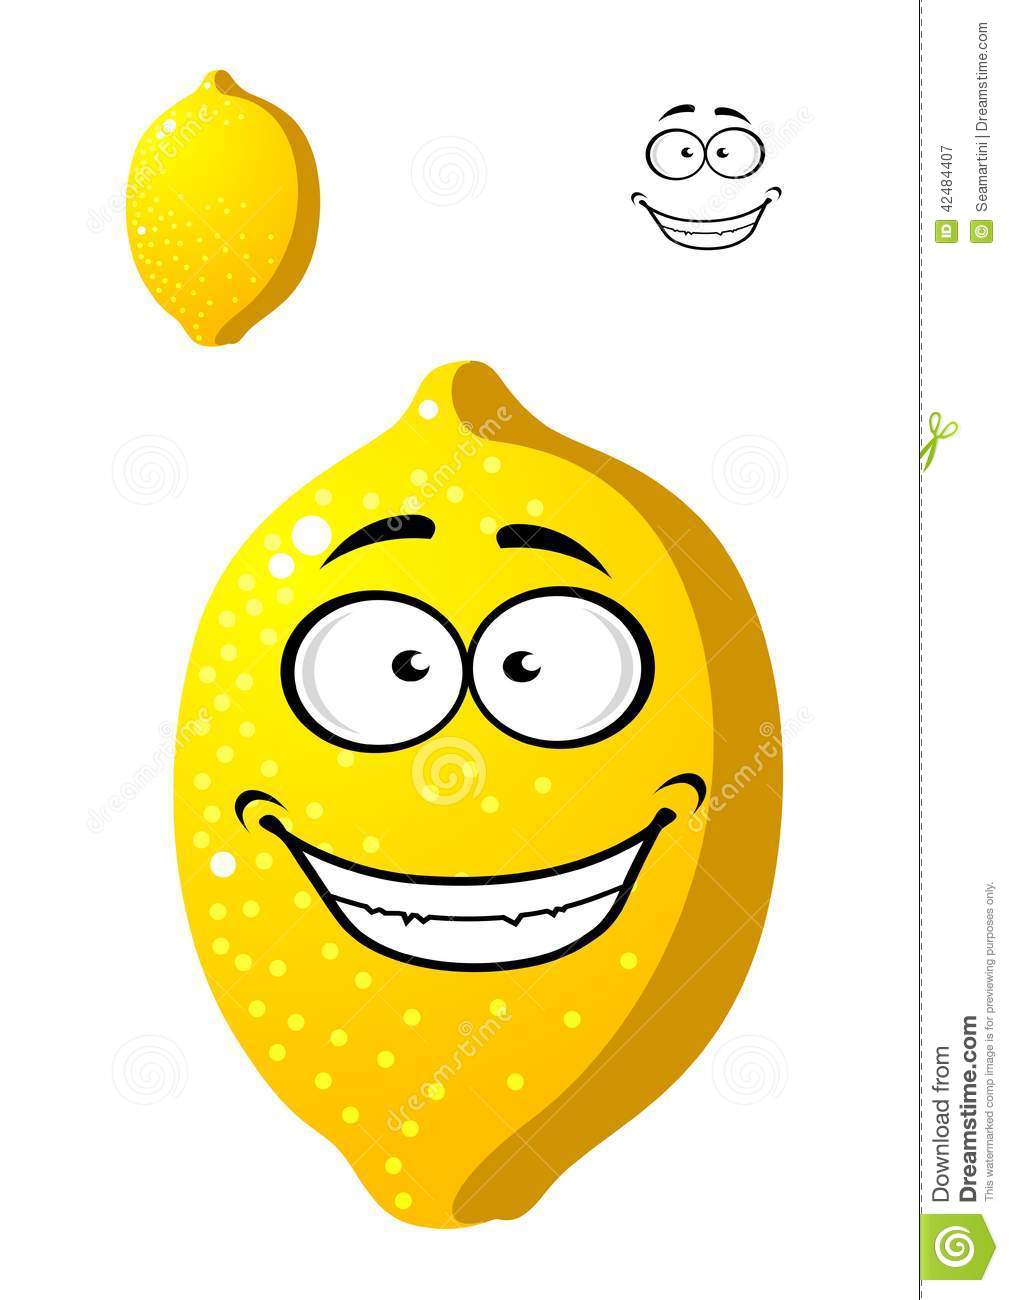 Happy Smiling Yellow Cartoon Lemon Fruit With A Wide Toothy Grin Plus